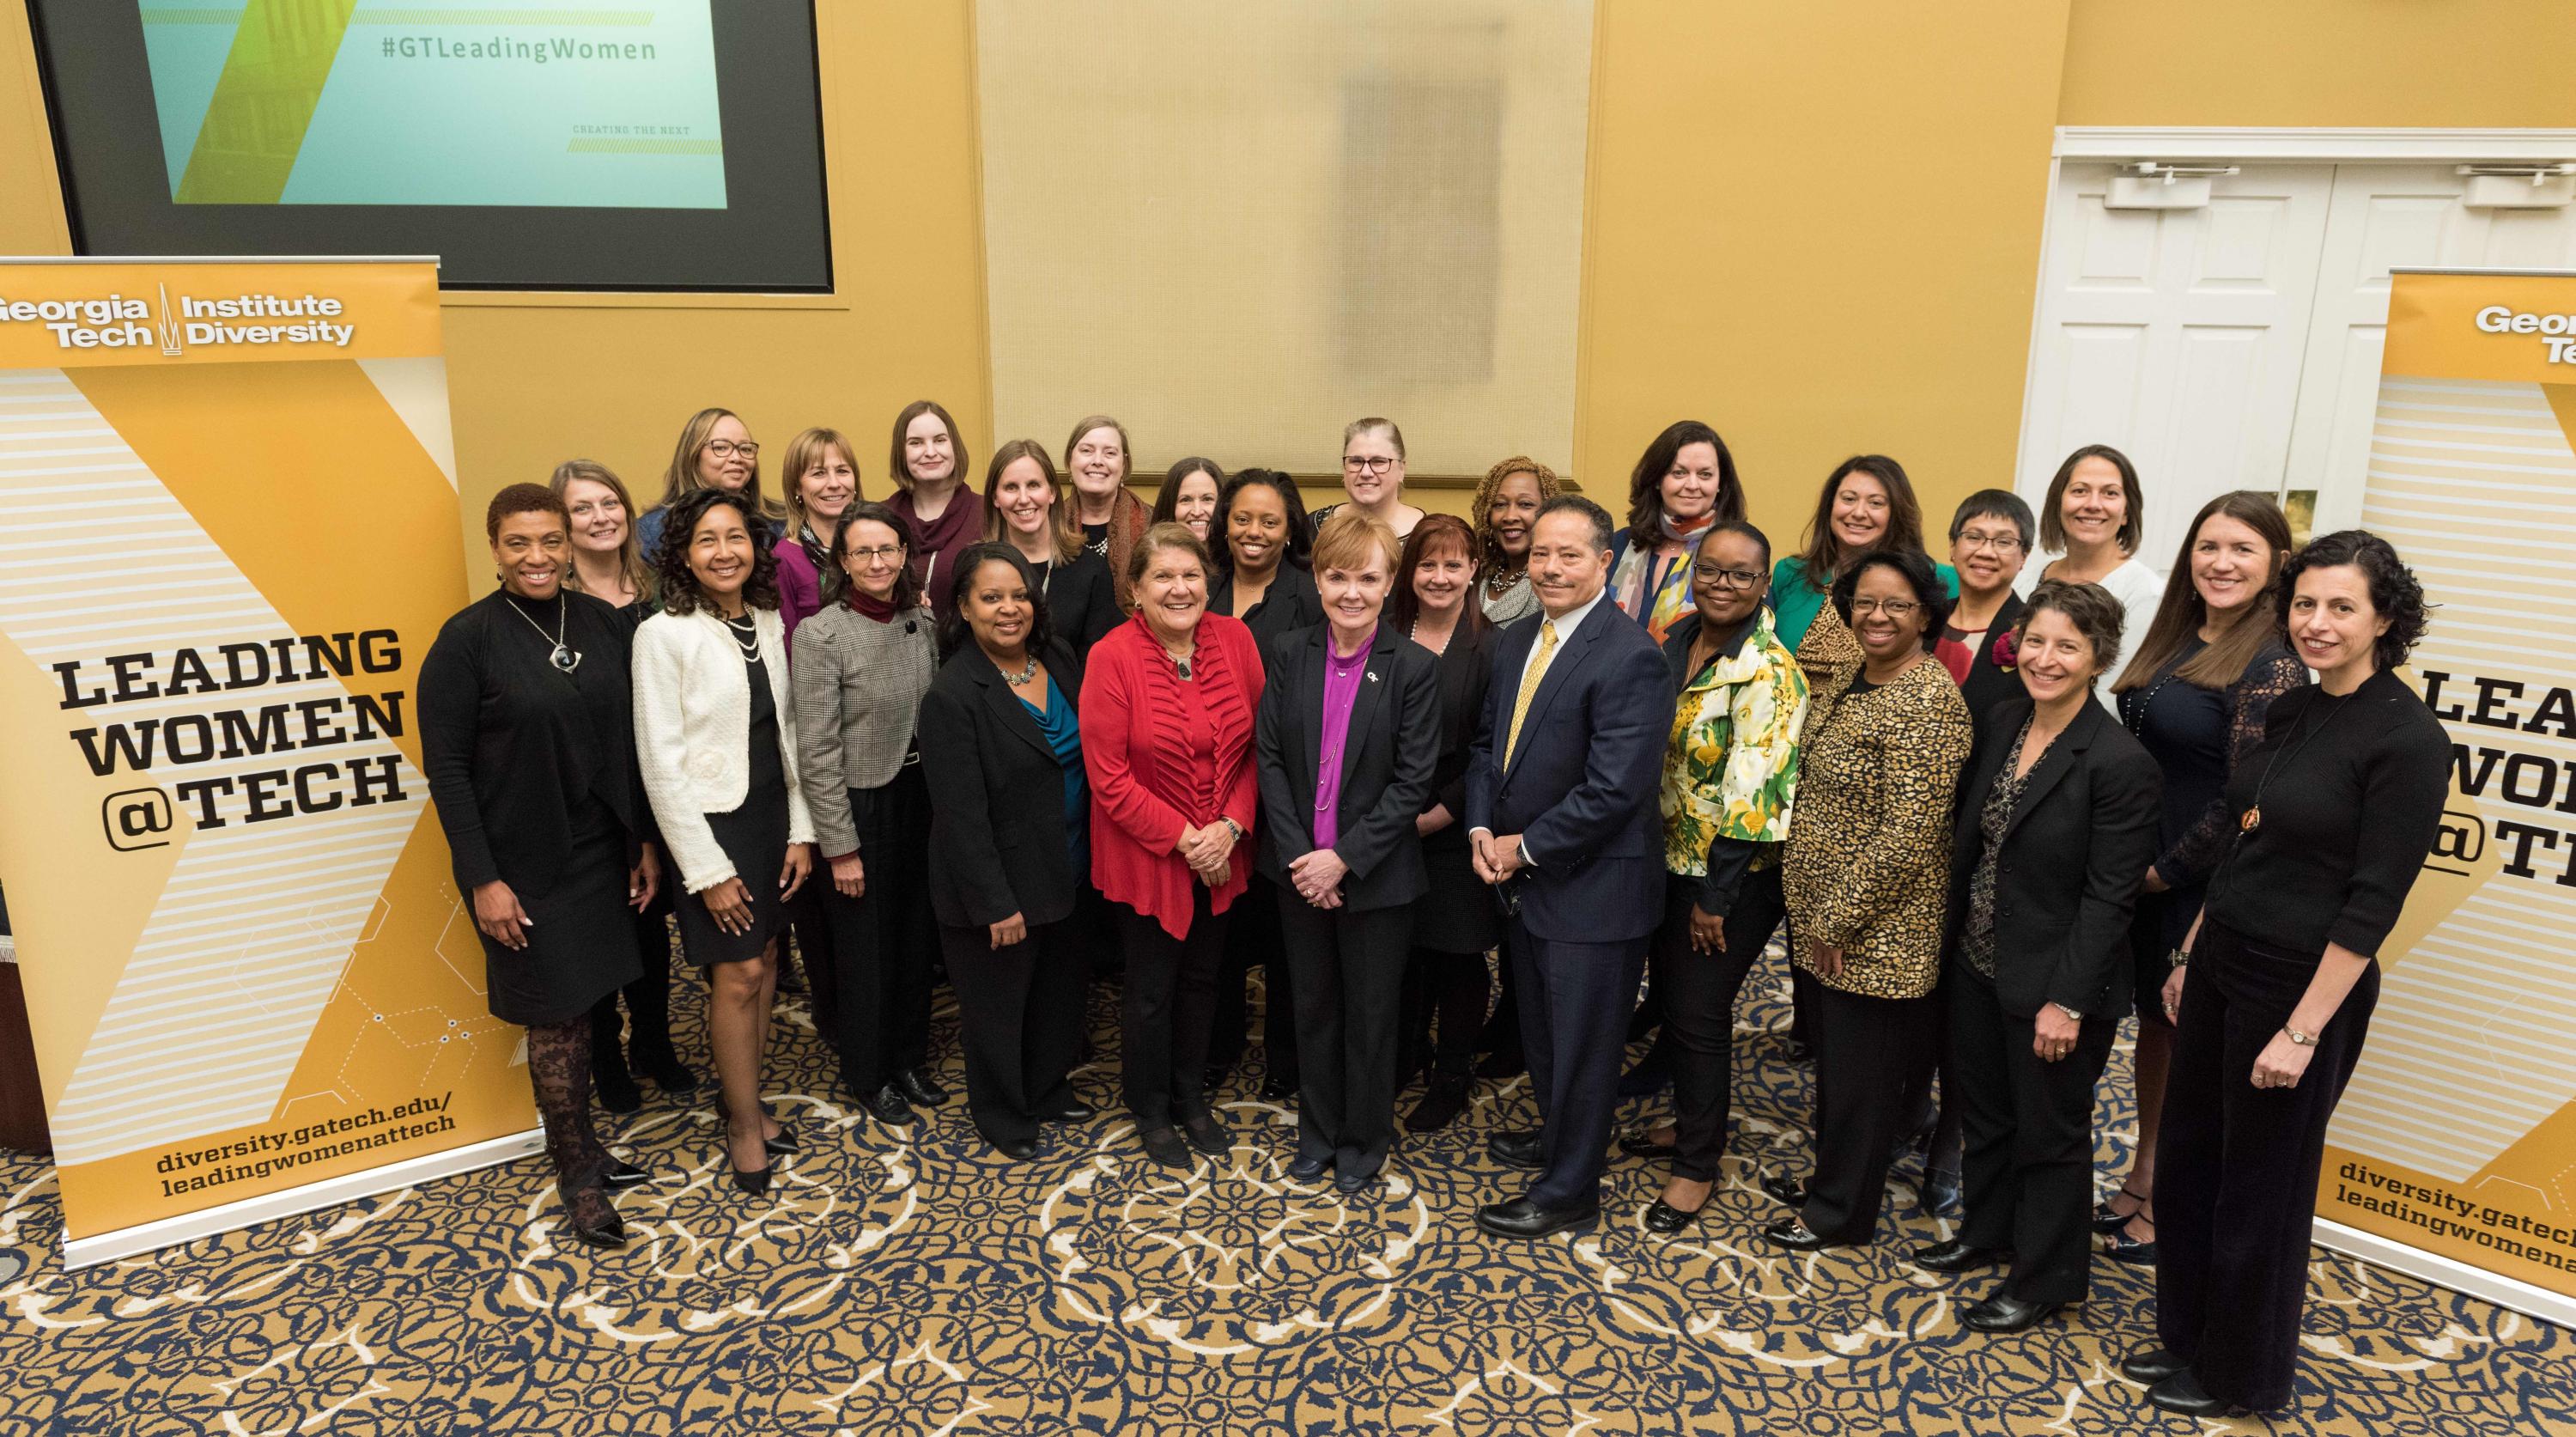 Institute Diversity is seeking nominations, including self-nominations, for the third cohort of the Leading Women@Tech program until May 8, 2018. 